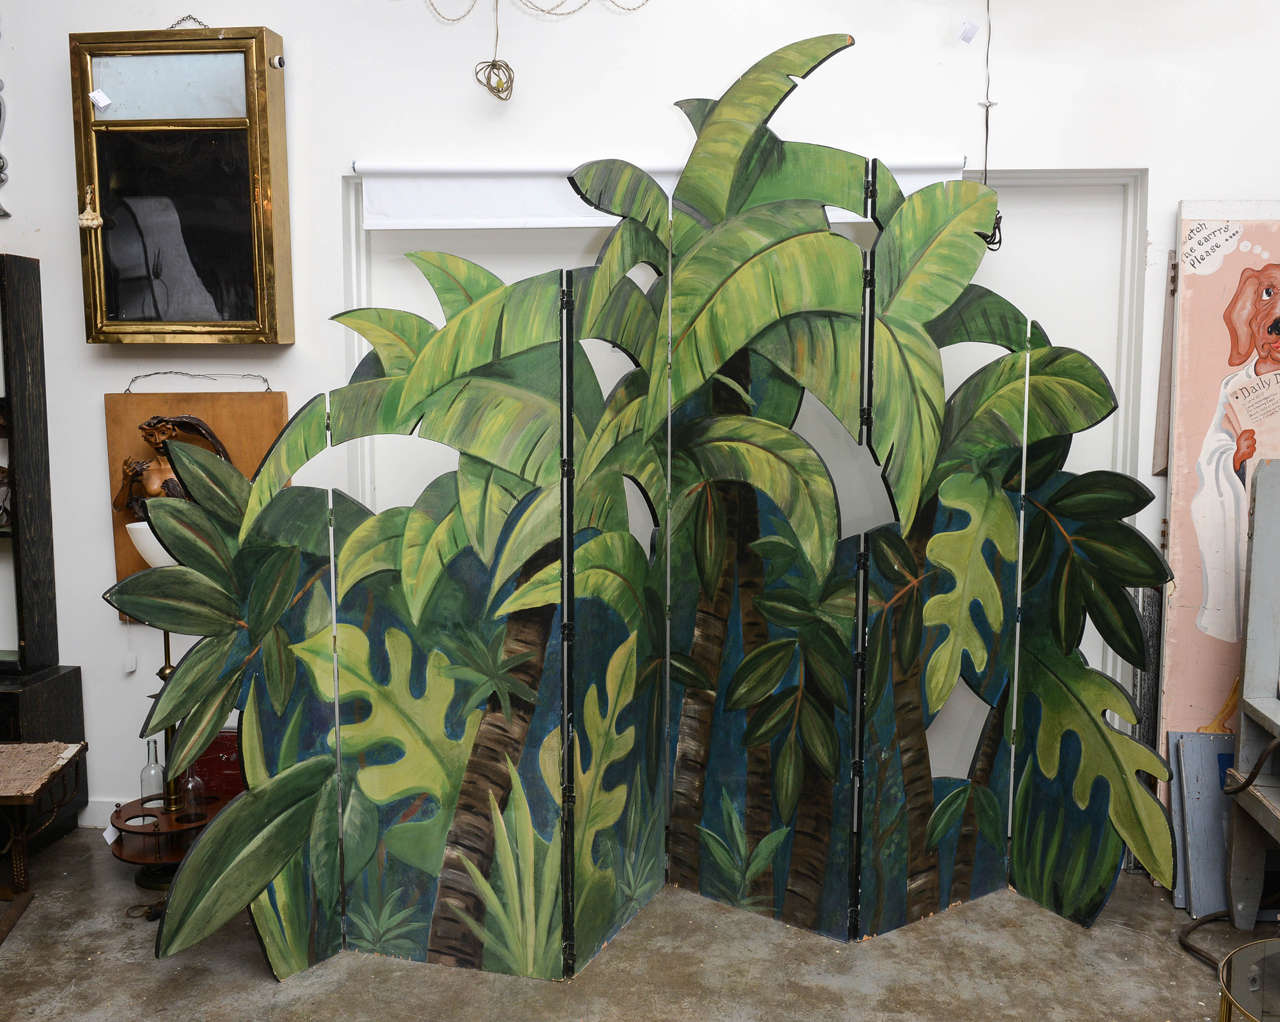 Fantastic hand painted, six paneled wooden cut out screen. Painted on both sides with tropical foliage. Perfect for home or commercial space. Very decorative.